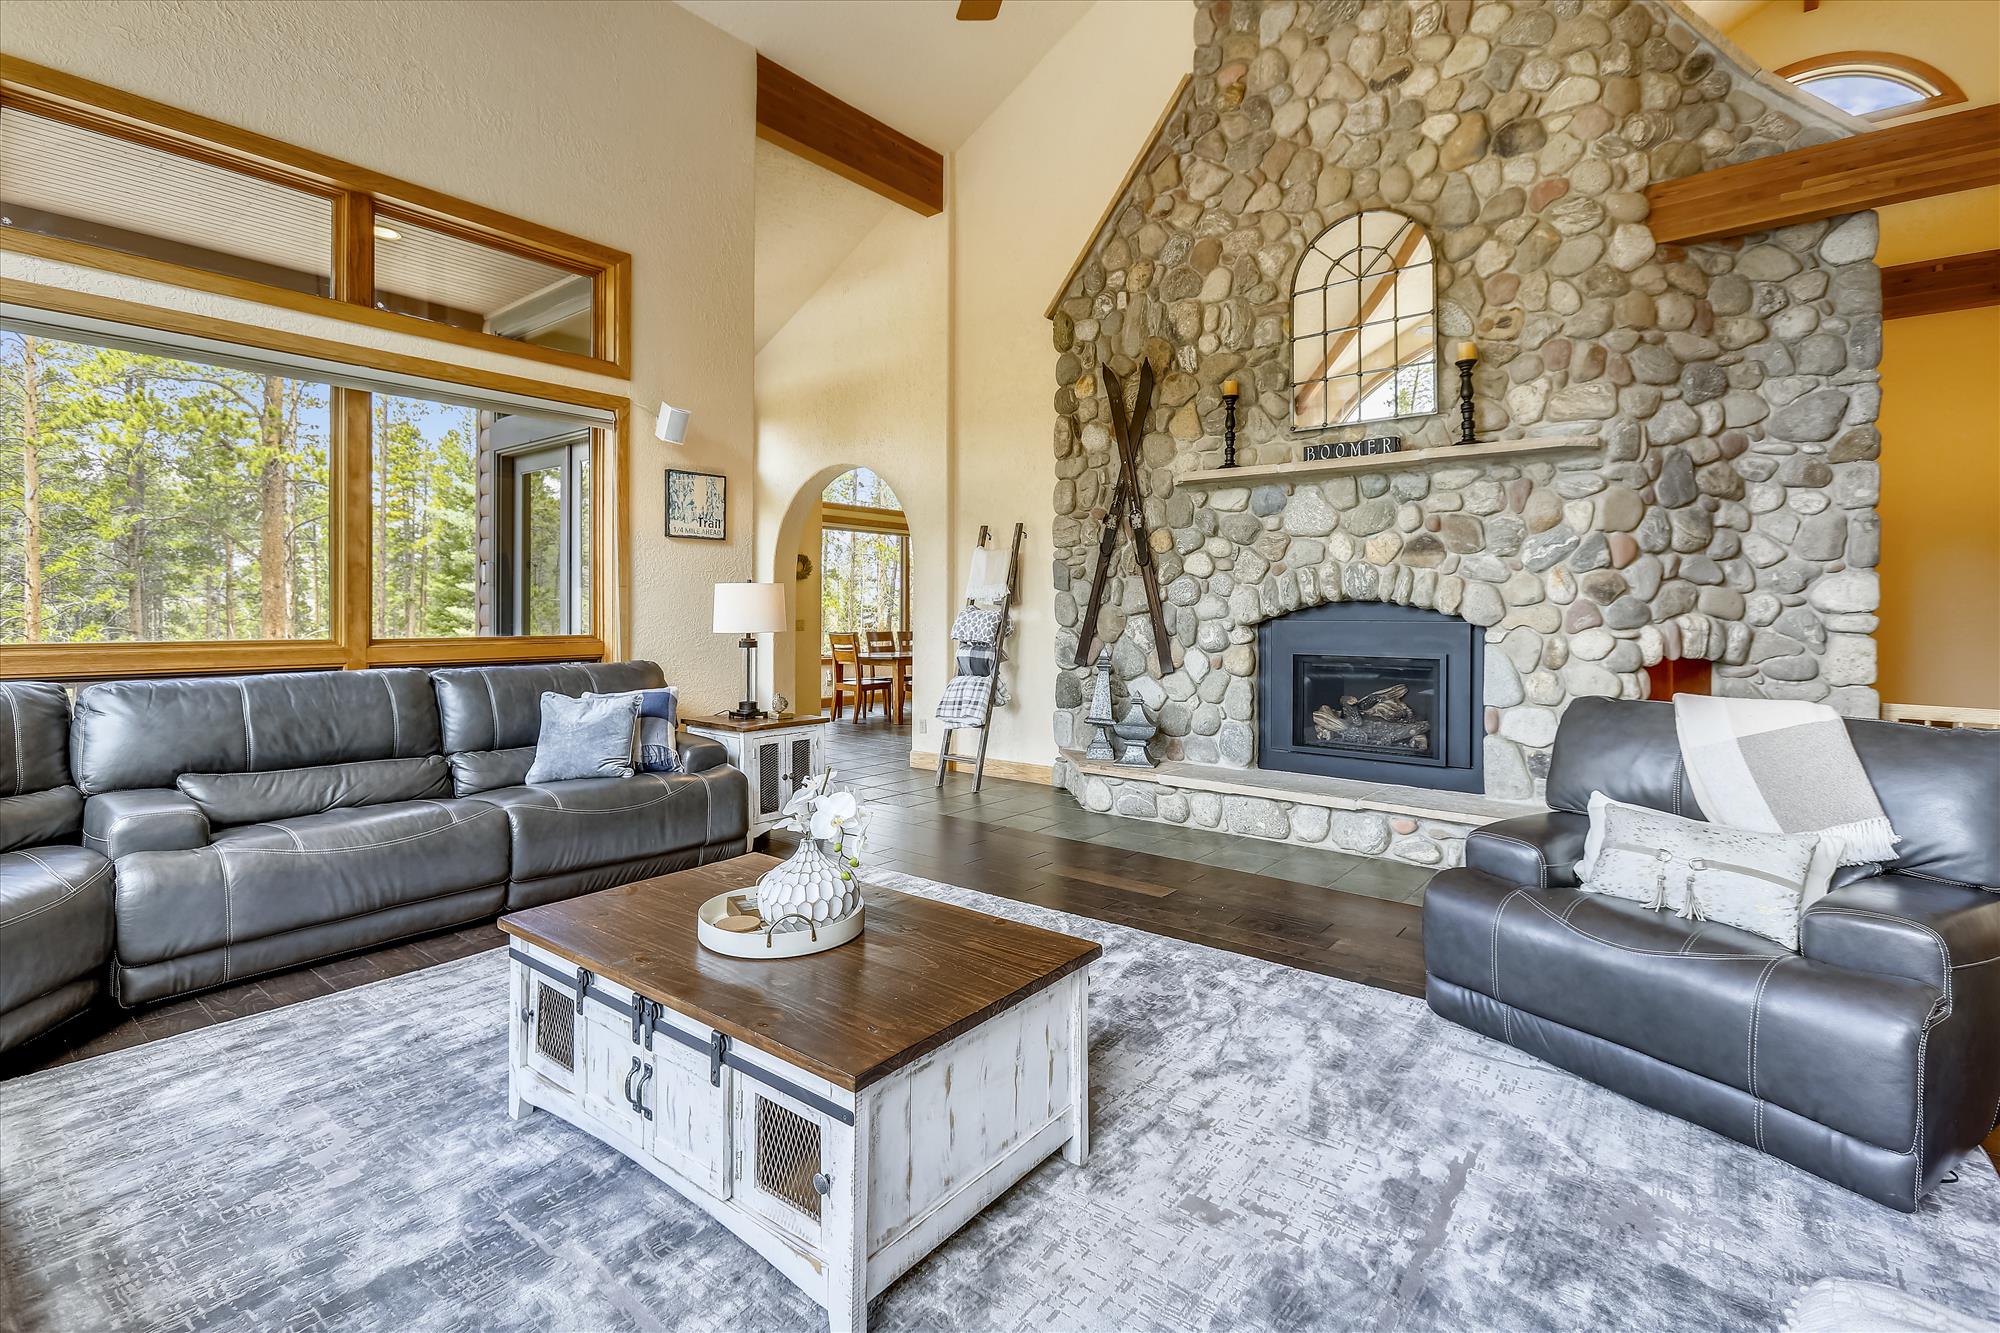 Cozy up by this gas fireplace and wind down from a long day - Evergreen Lodge Breckenridge Vacation Rental